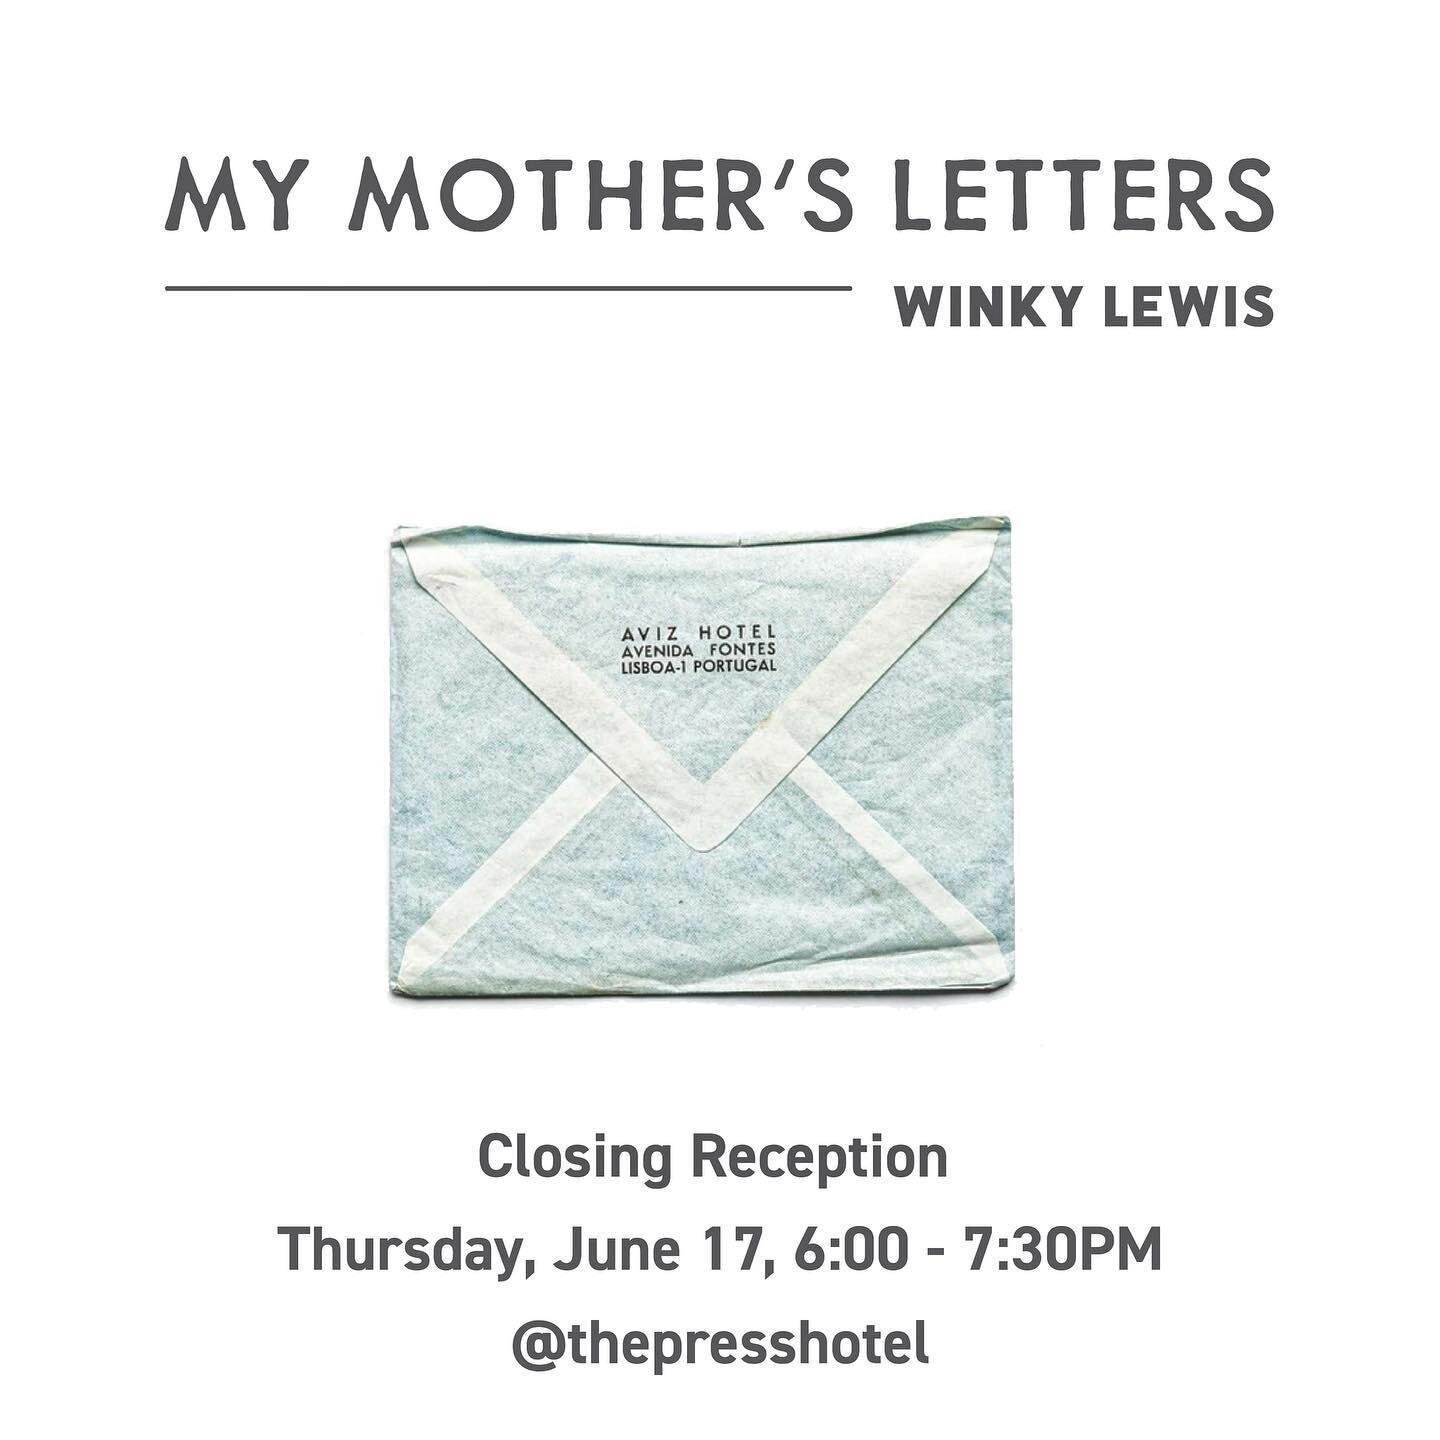 A few more days to see the incredible work of @winkylewis @thepresshotel ✉️

&ldquo;My Mother&rsquo;s Letters&rdquo; showcases beautiful photography, craft, and storytelling all in one show. Please join us for the closing reception, June 17th from 6-